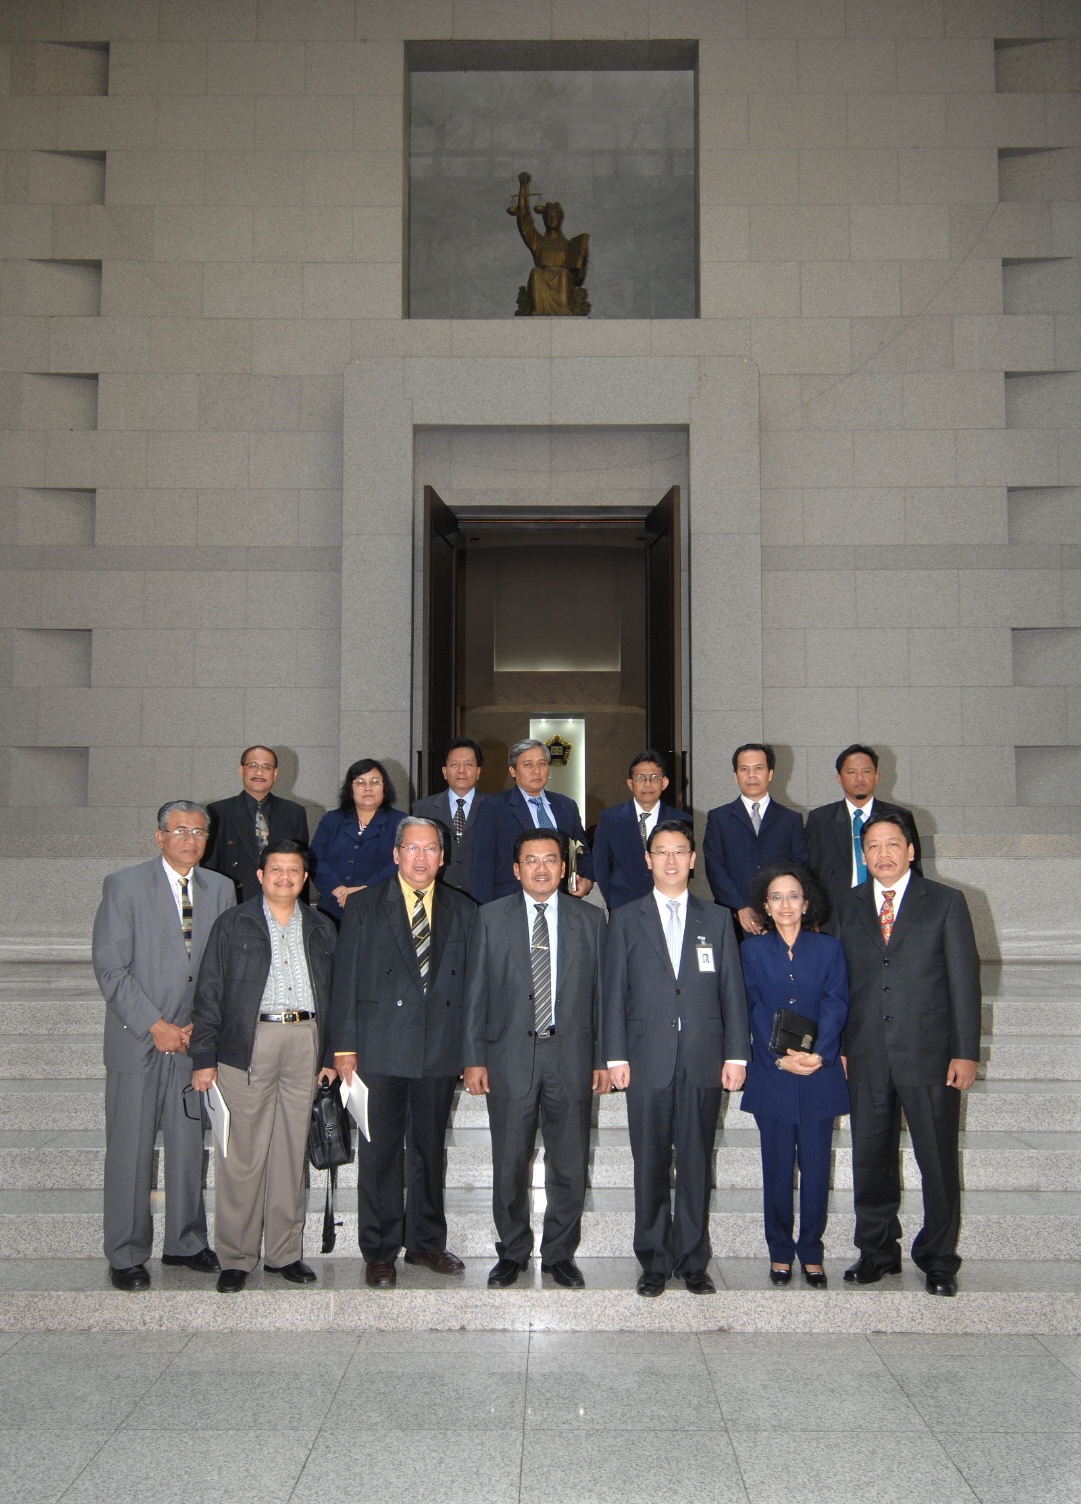 [05_20_08]Delegation from the Administration of the Supreme Court of Indonesia visits the Supreme Court